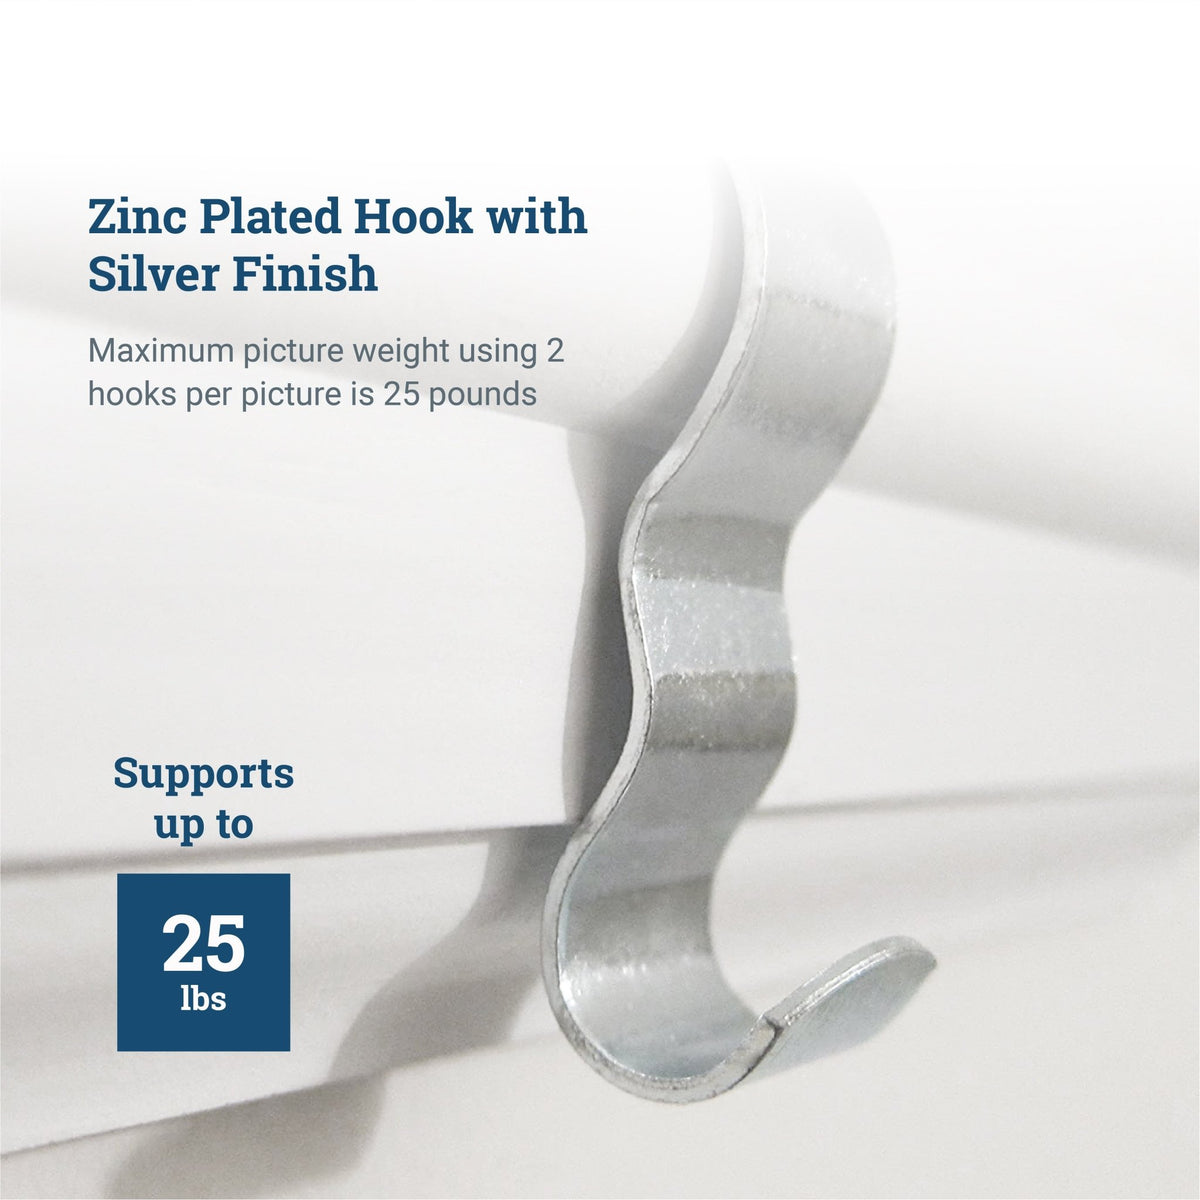 Wide Picture Rail Hook Zinc/Silver - HWR-2220X - Picture Hang Solutions